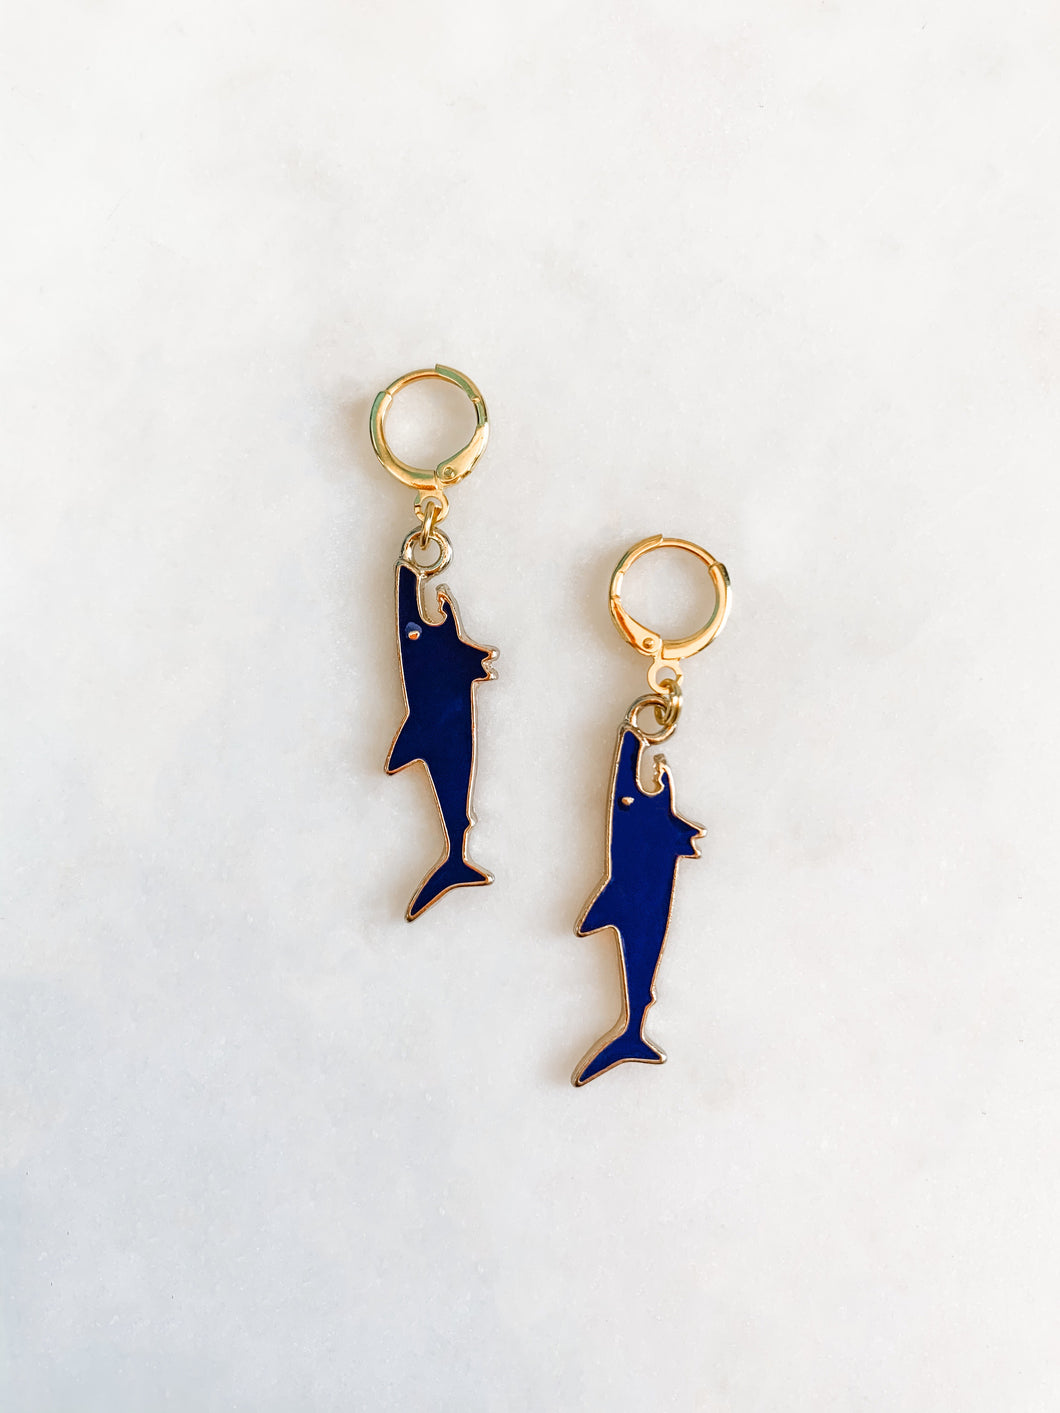 Swimming with Sharks Earrings